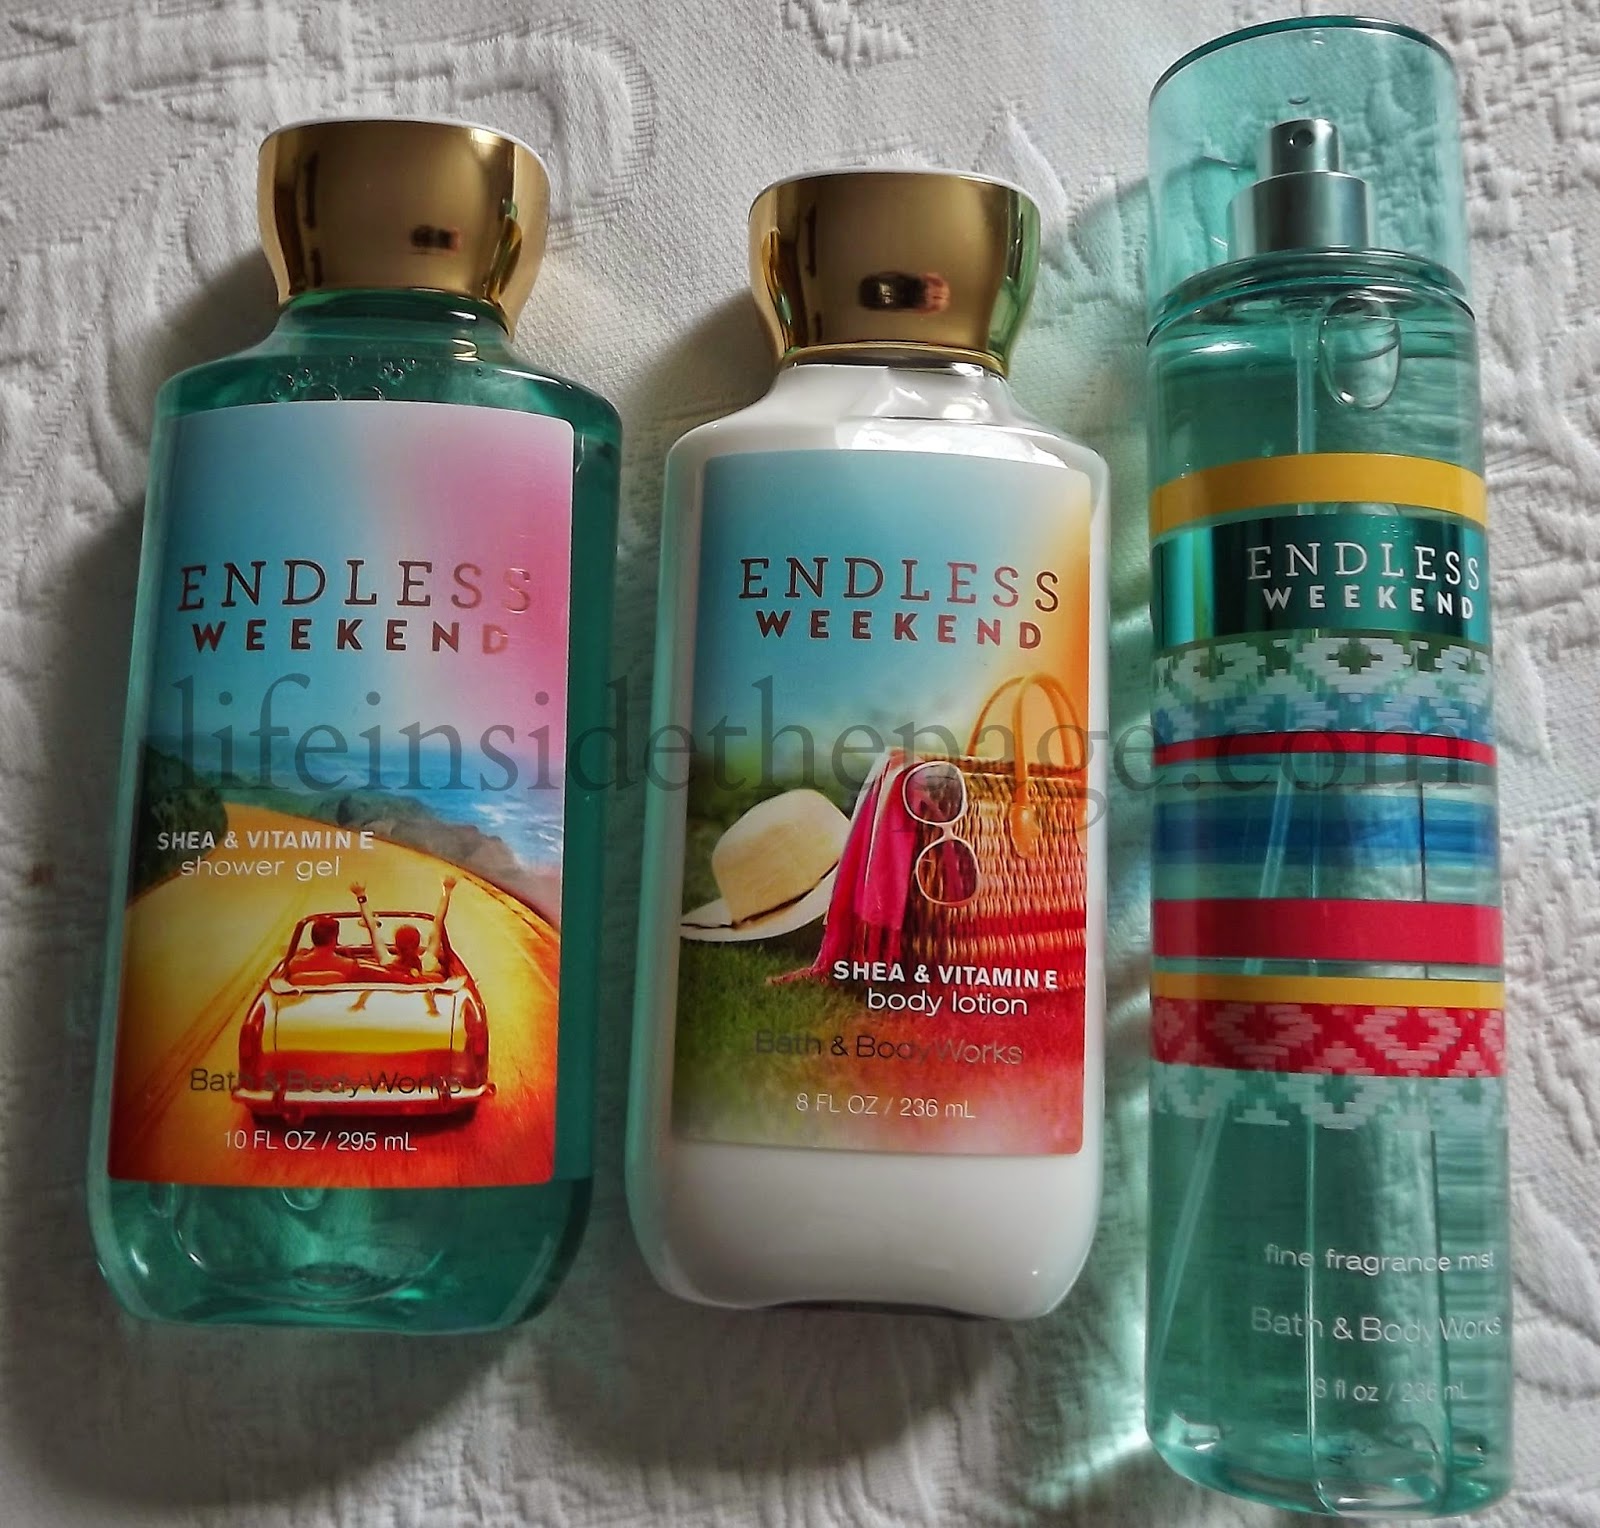 Endless weekend bath and body works